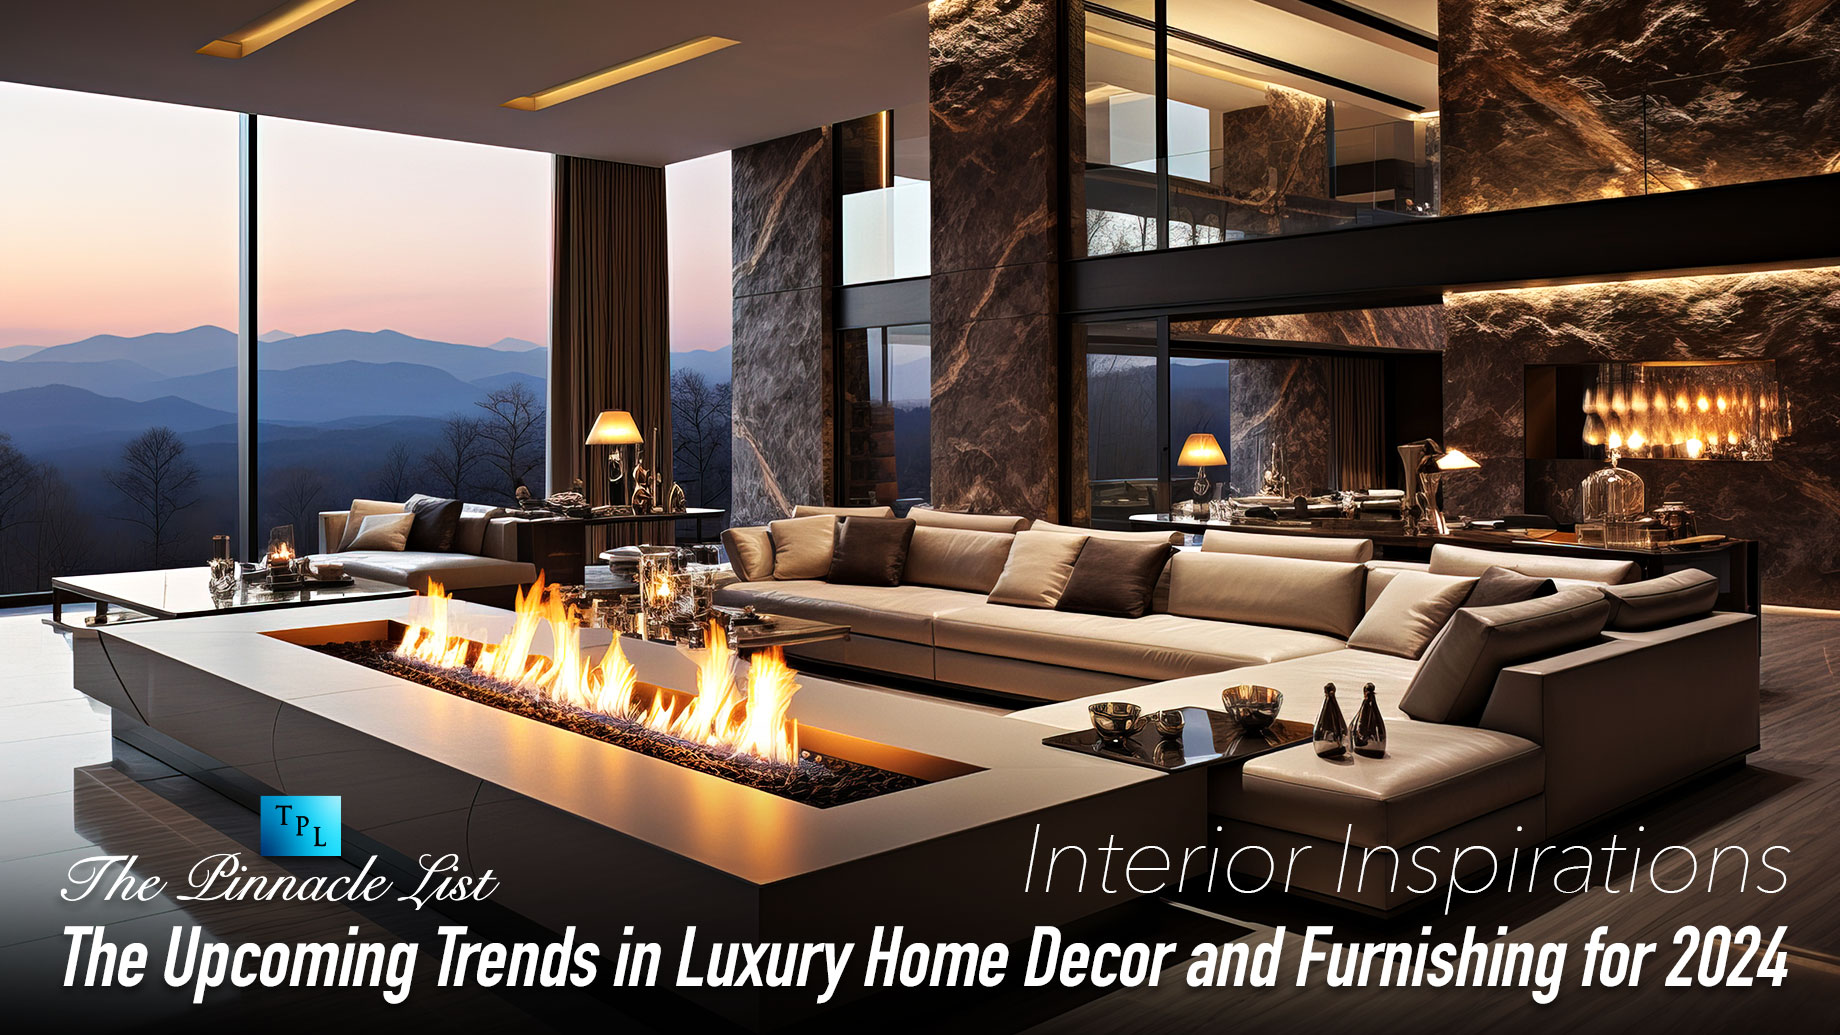 Interior Inspirations: The Upcoming Trends in Luxury Home Decor and Furnishing for 2024